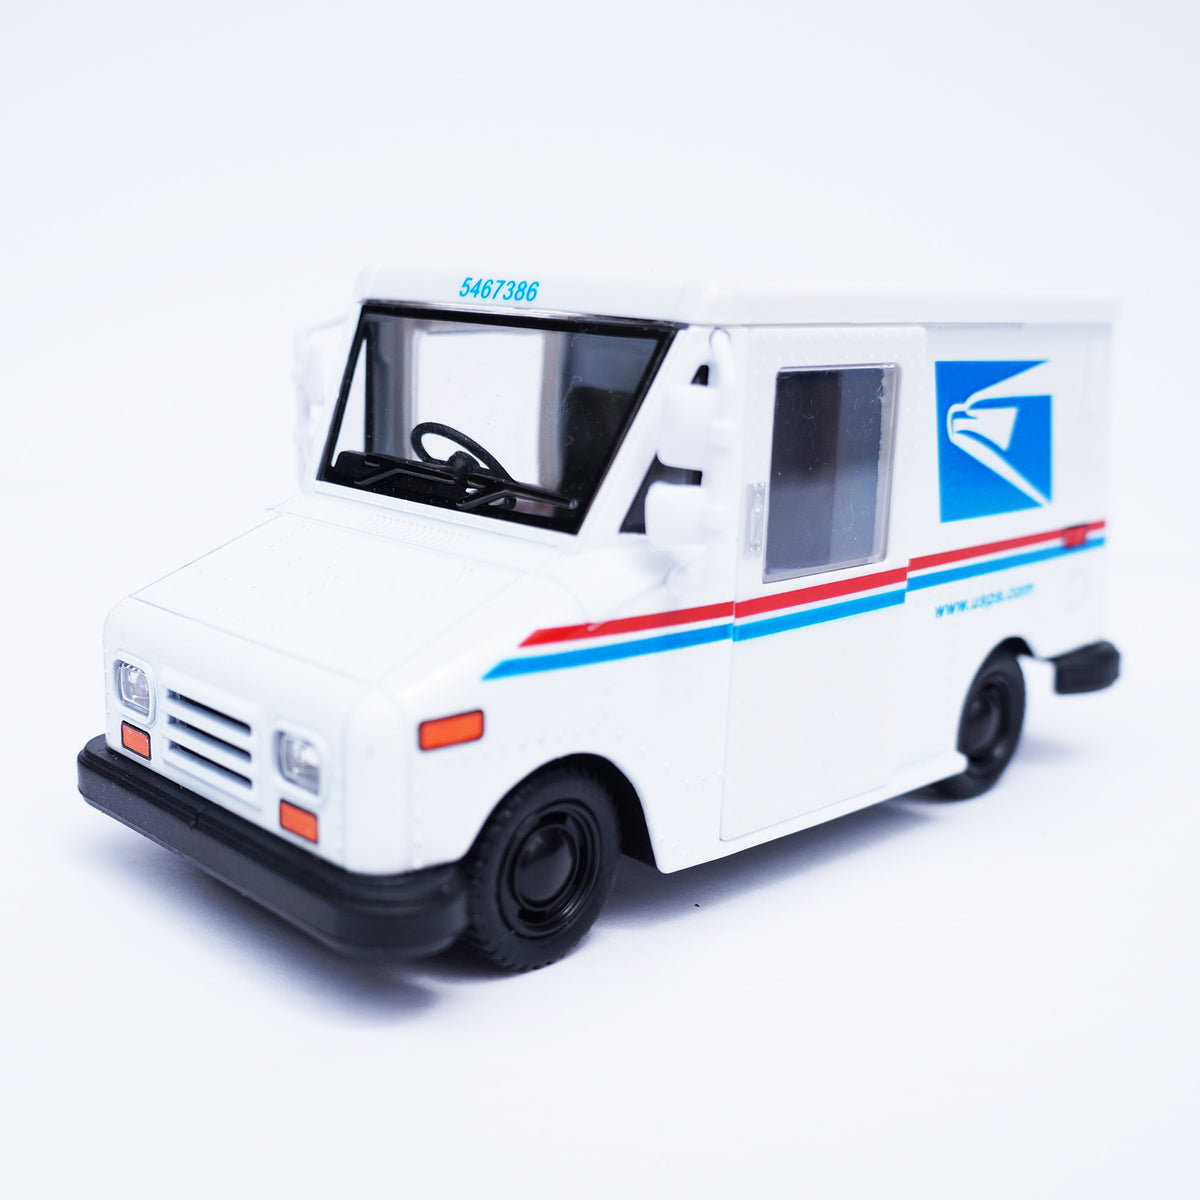 toy mail truck with doors that open